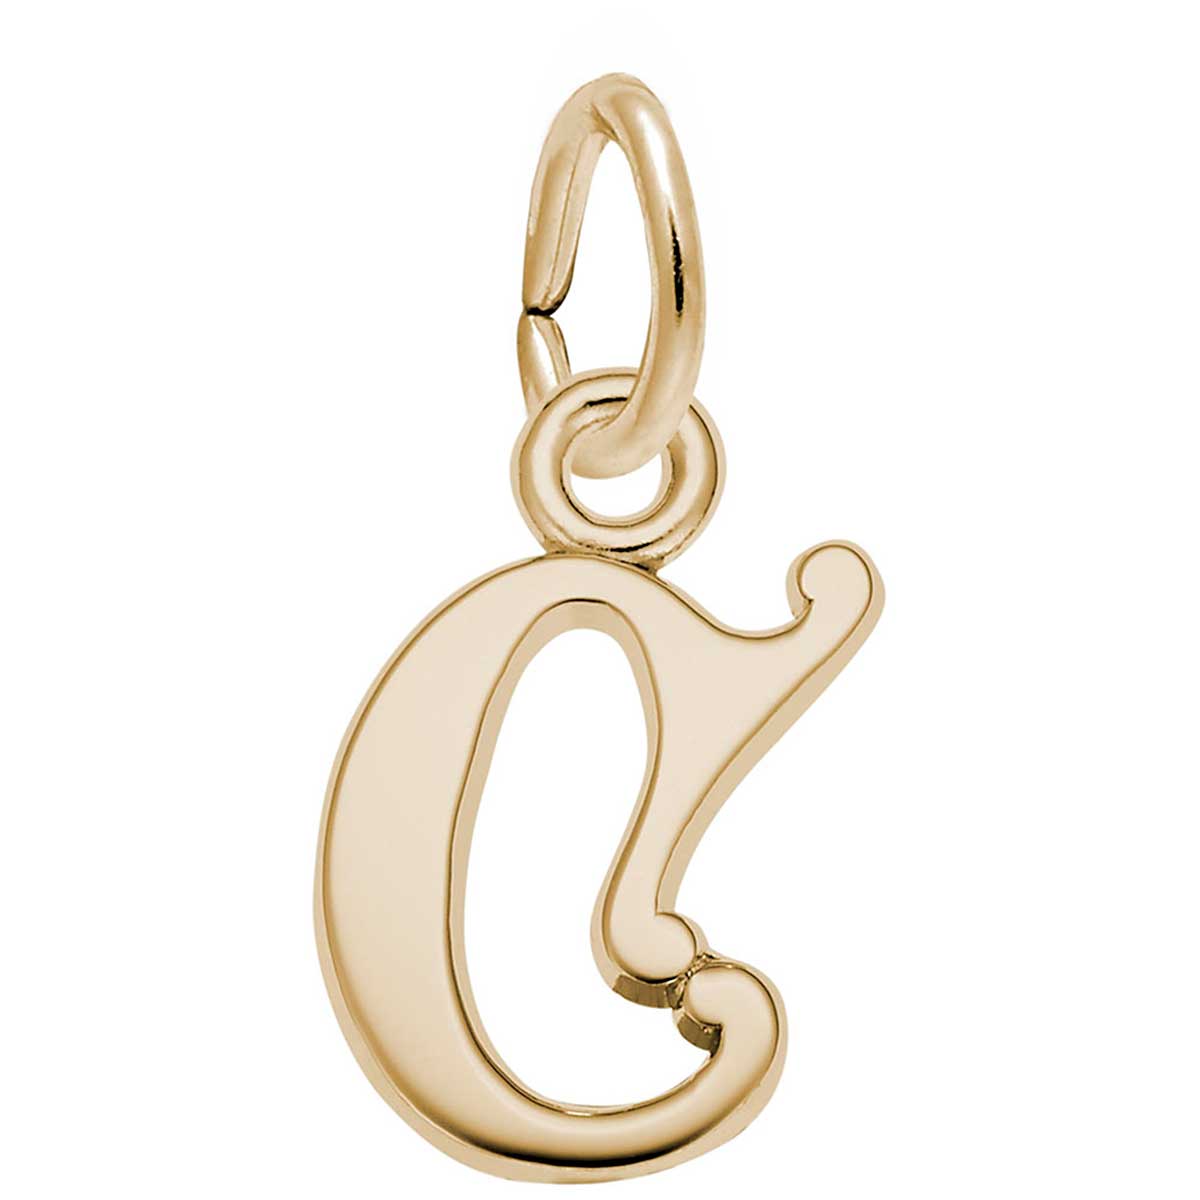 Rembrandt Letter C Charm, Gold Plated Silver: Precious Accents, Ltd.